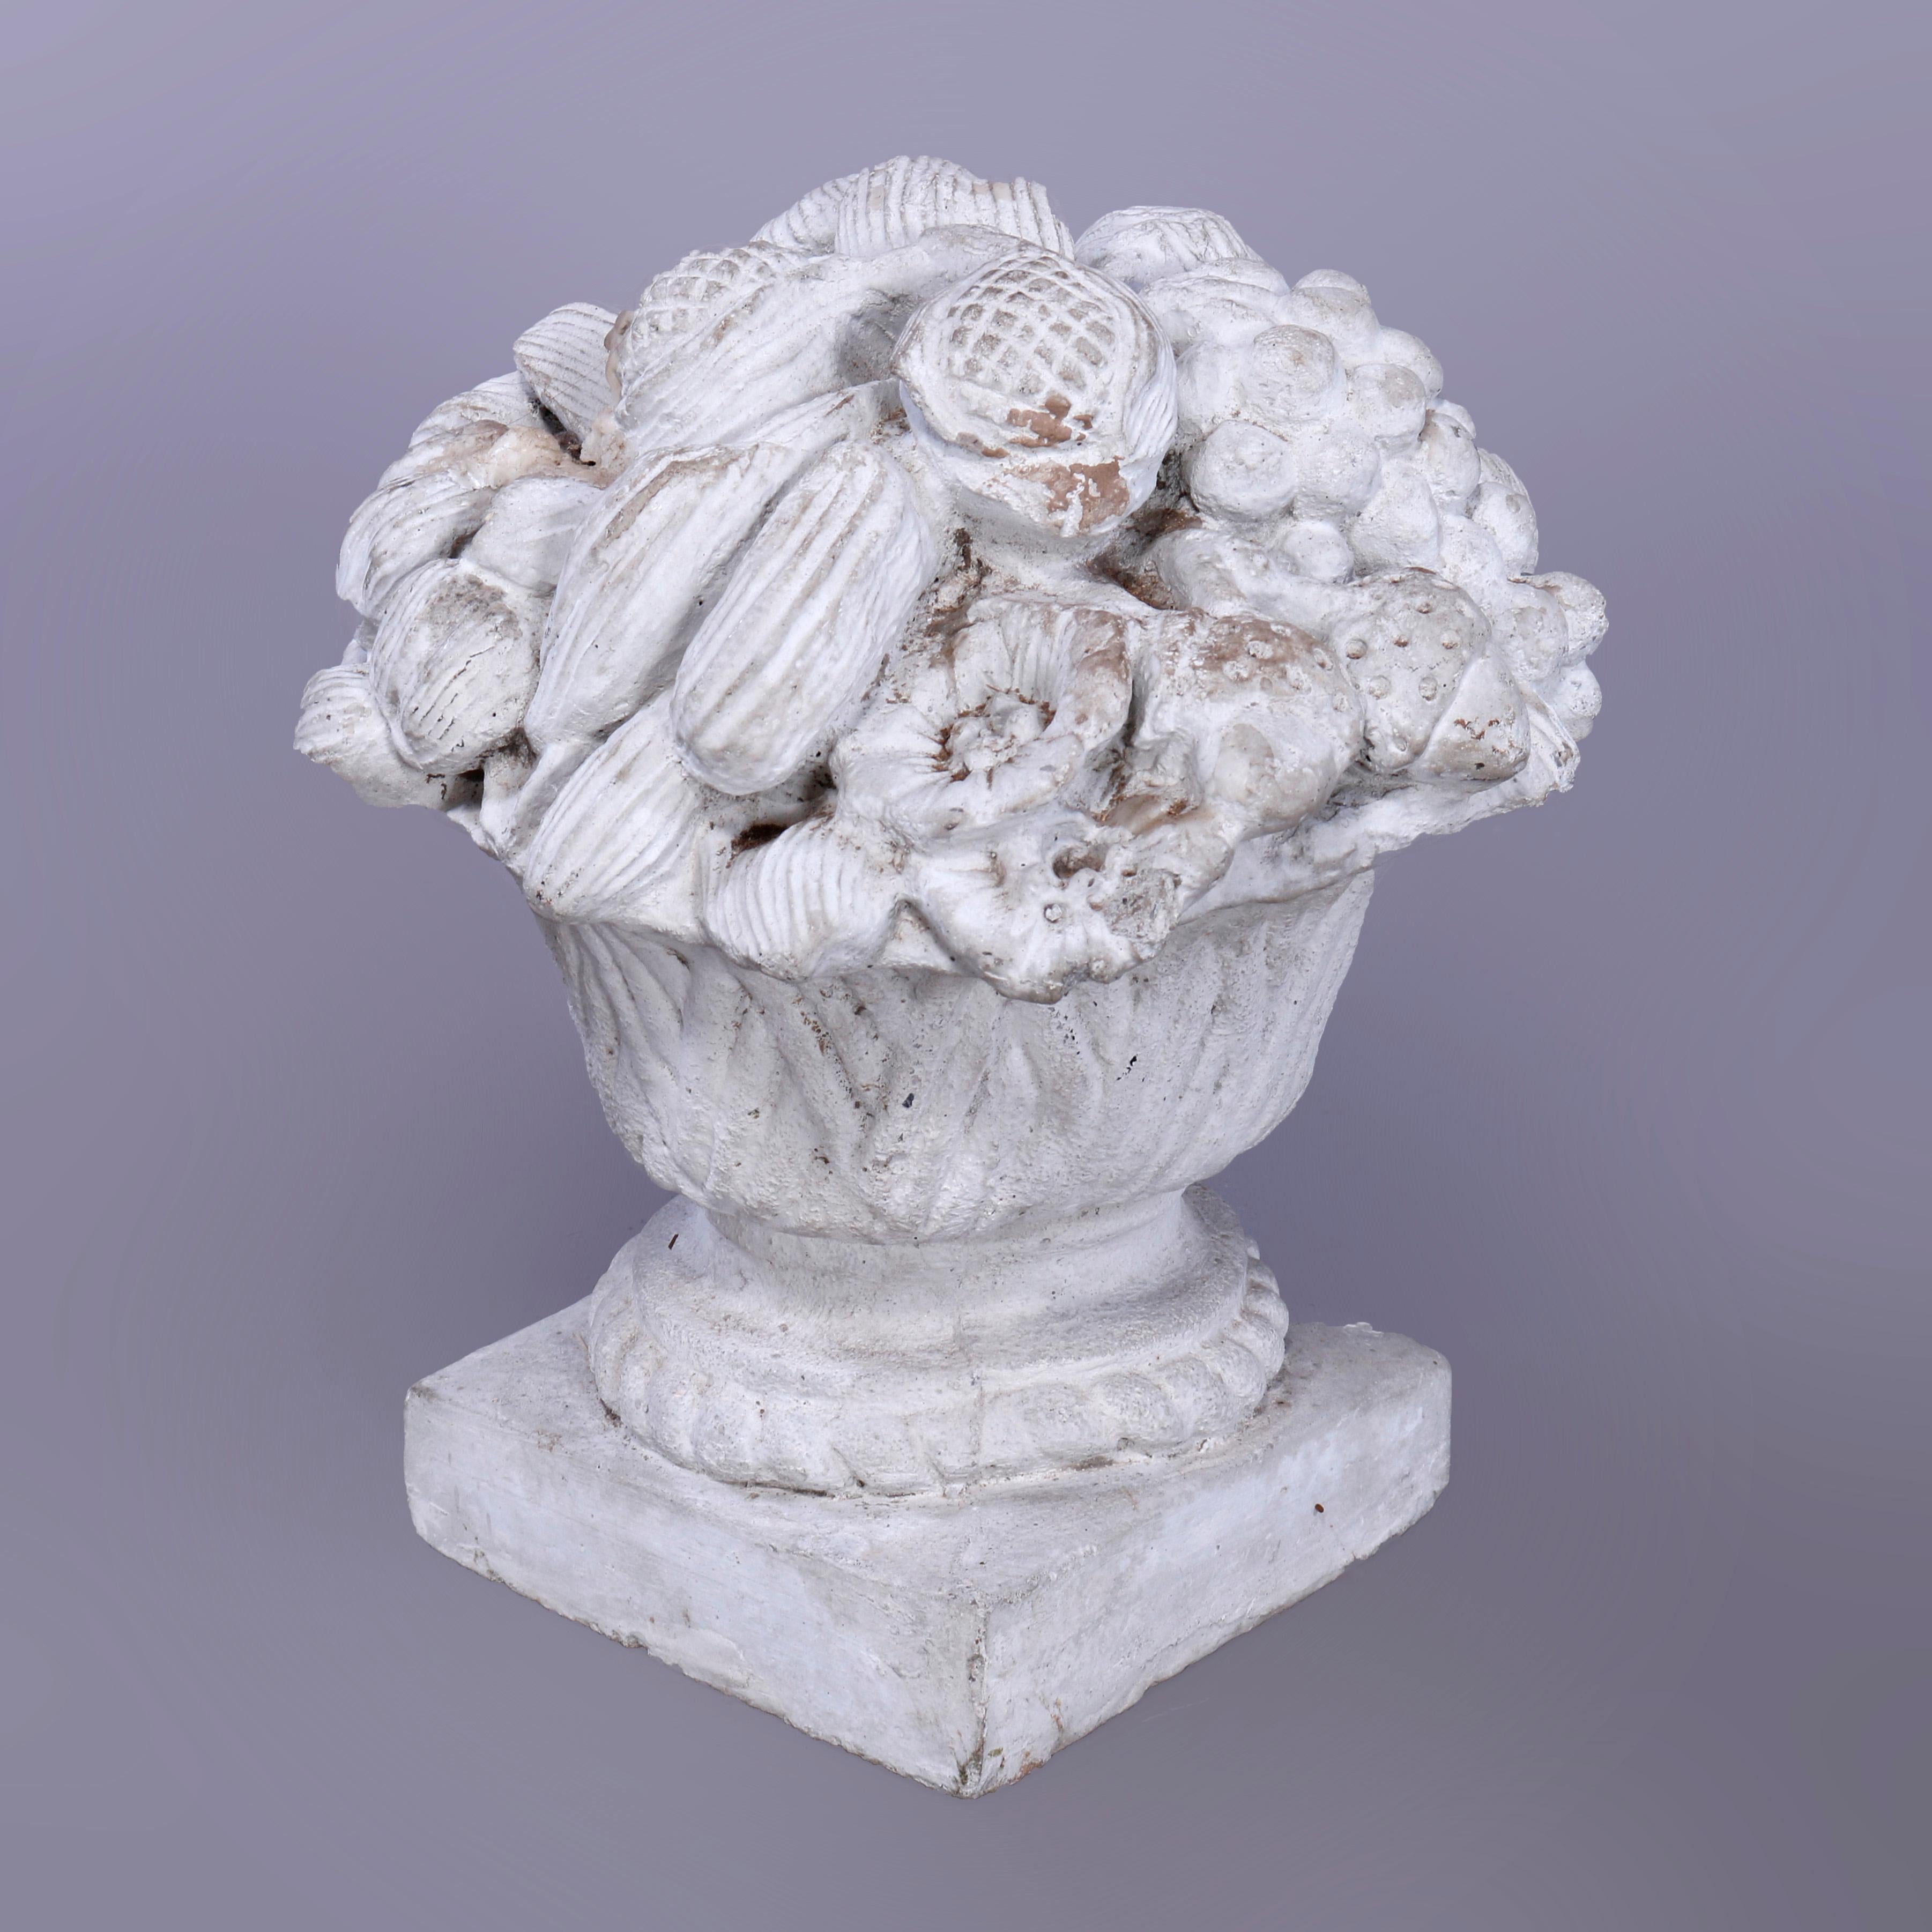 A French Classical garden ornament offers cast hard stone statue depicting Panier de Fruits (Basket of Fruit), 20th century

Measures- 12''H x 10.5''W x 10.5''D.

Catalogue Note: Ask about DISCOUNTED DELIVERY RATES available to most regions within